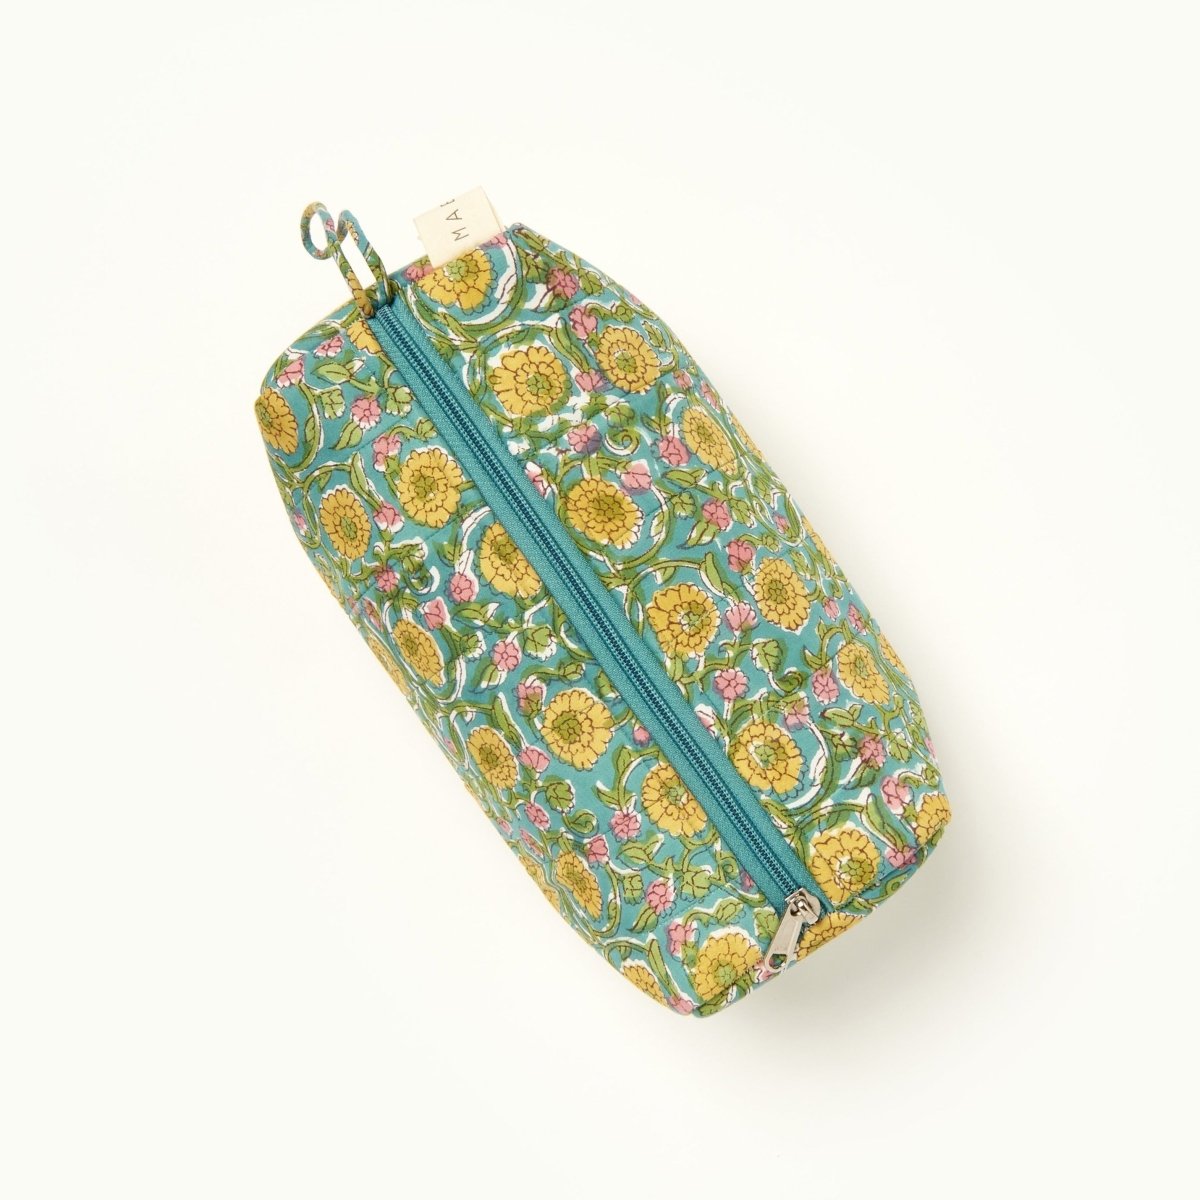  A green, blue, yellow and pink floral patterned makeup bag. The Fiona Makeup Bag from Maelu is designed in Portland, Oregon and printed in India.